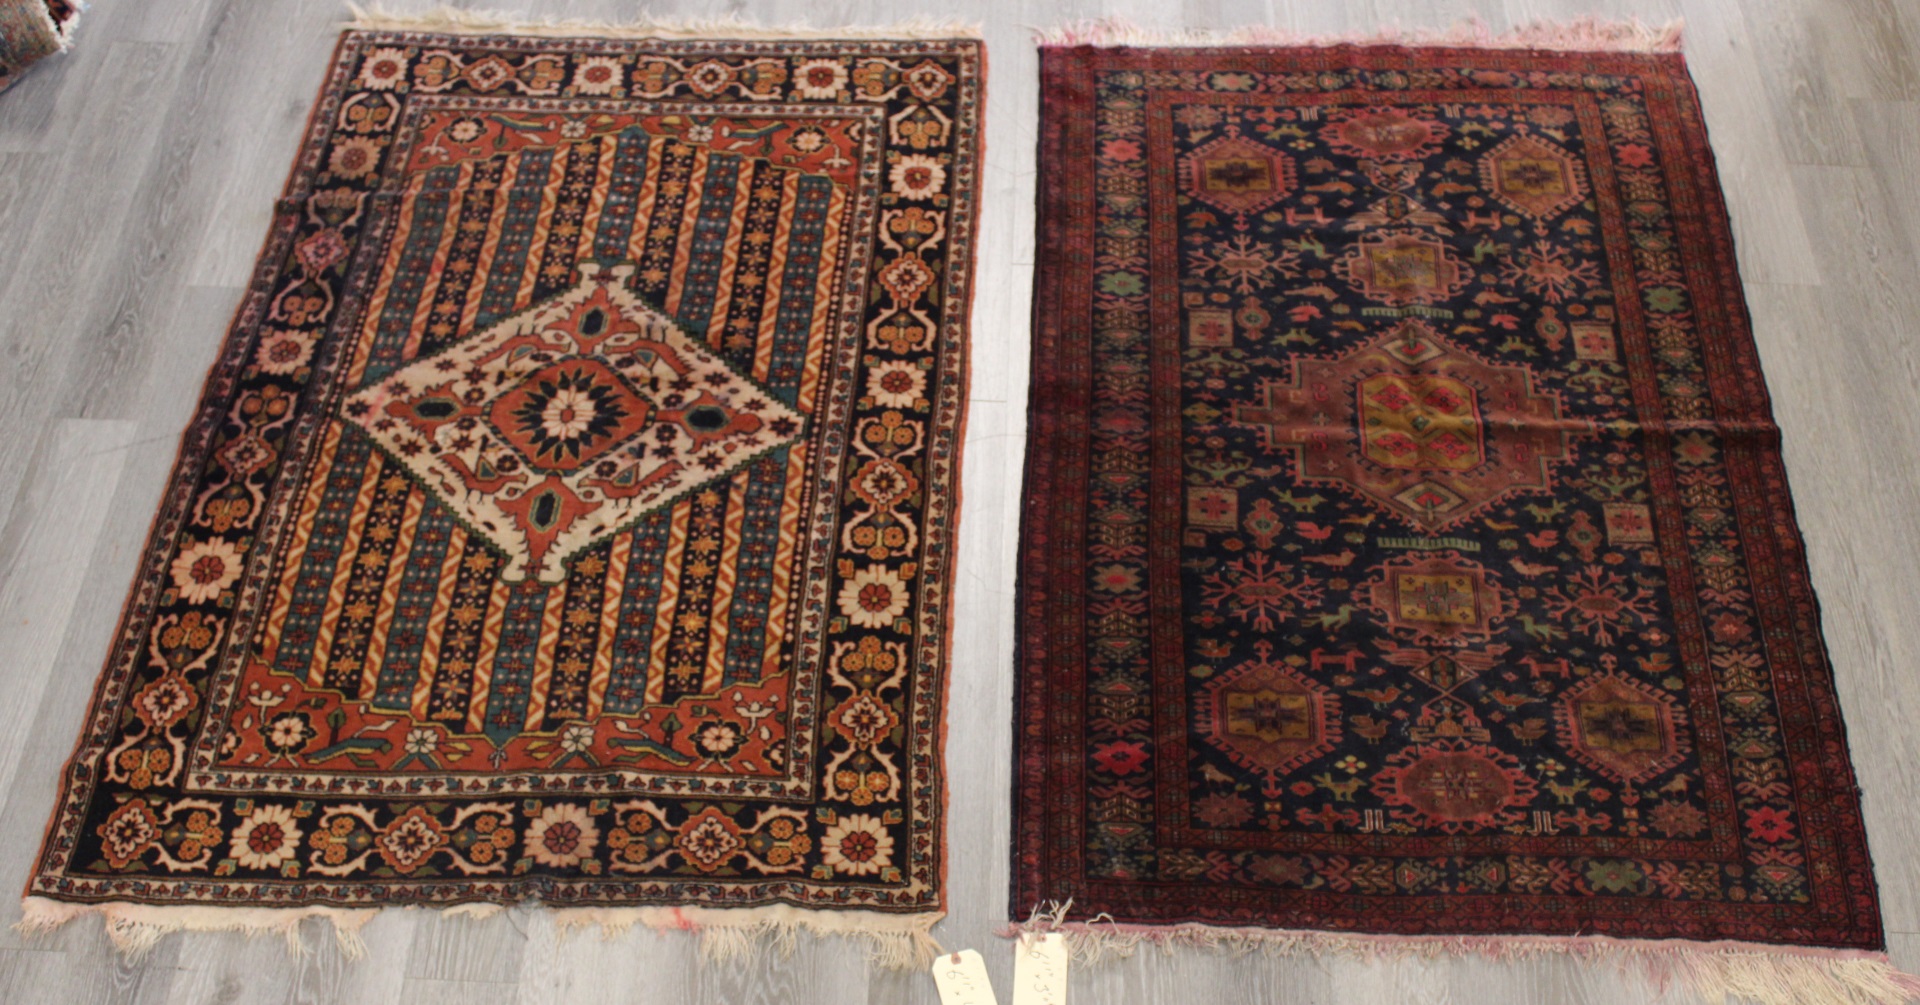 2 ANTIQUE AND FINELY HAND WOVEN 3bbecd